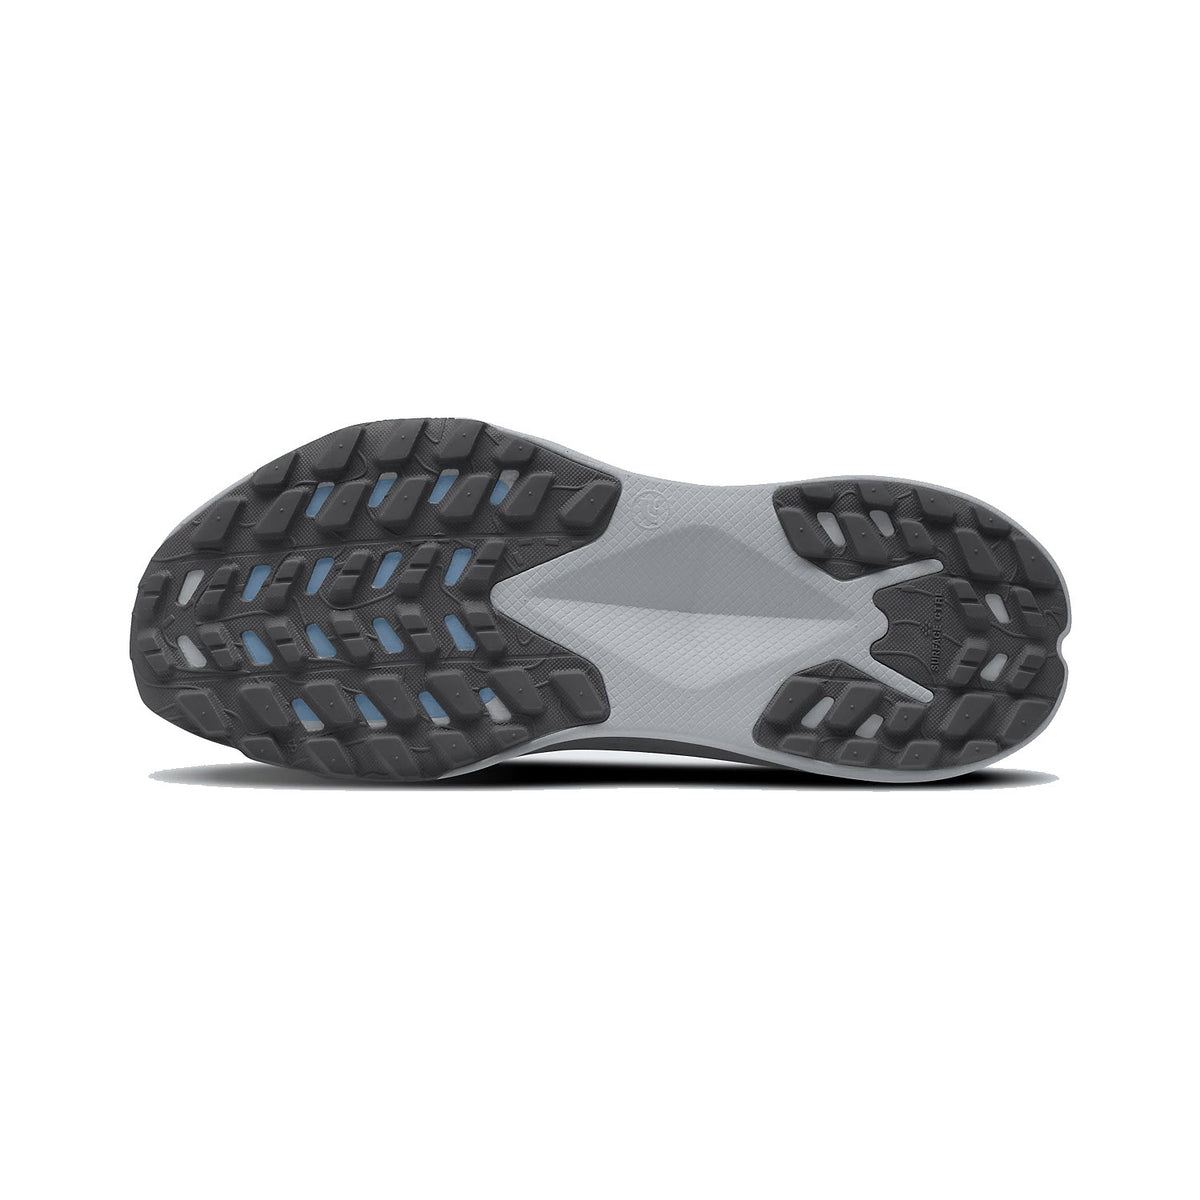 Bottom view of a North Face trail-running shoe sole with intricate black and blue tread pattern on a white background.